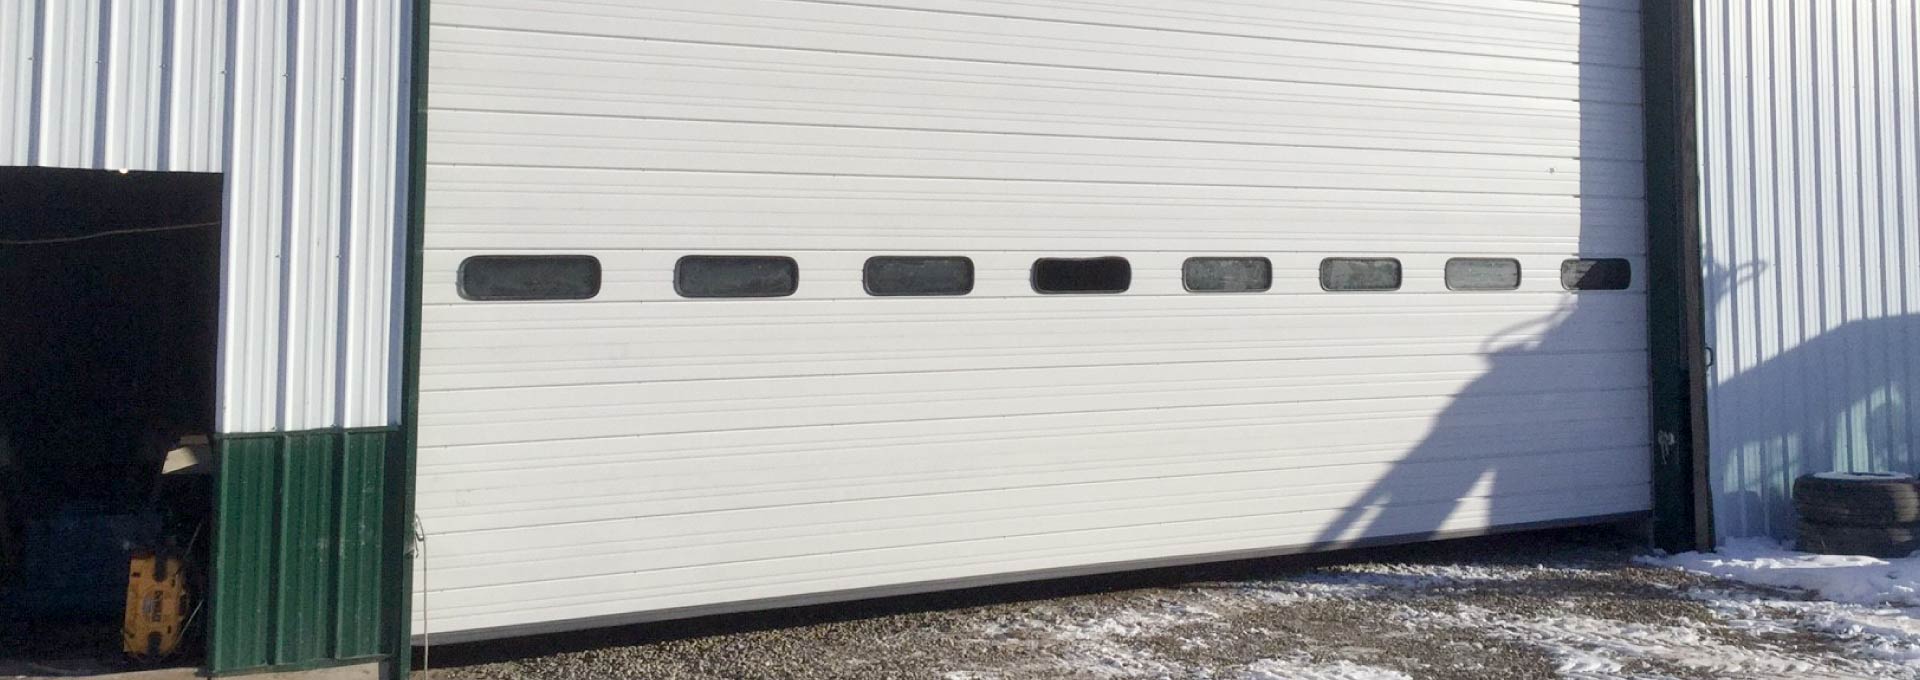 The industry's most comprehensive line of Insulated Sectional Steel Doors